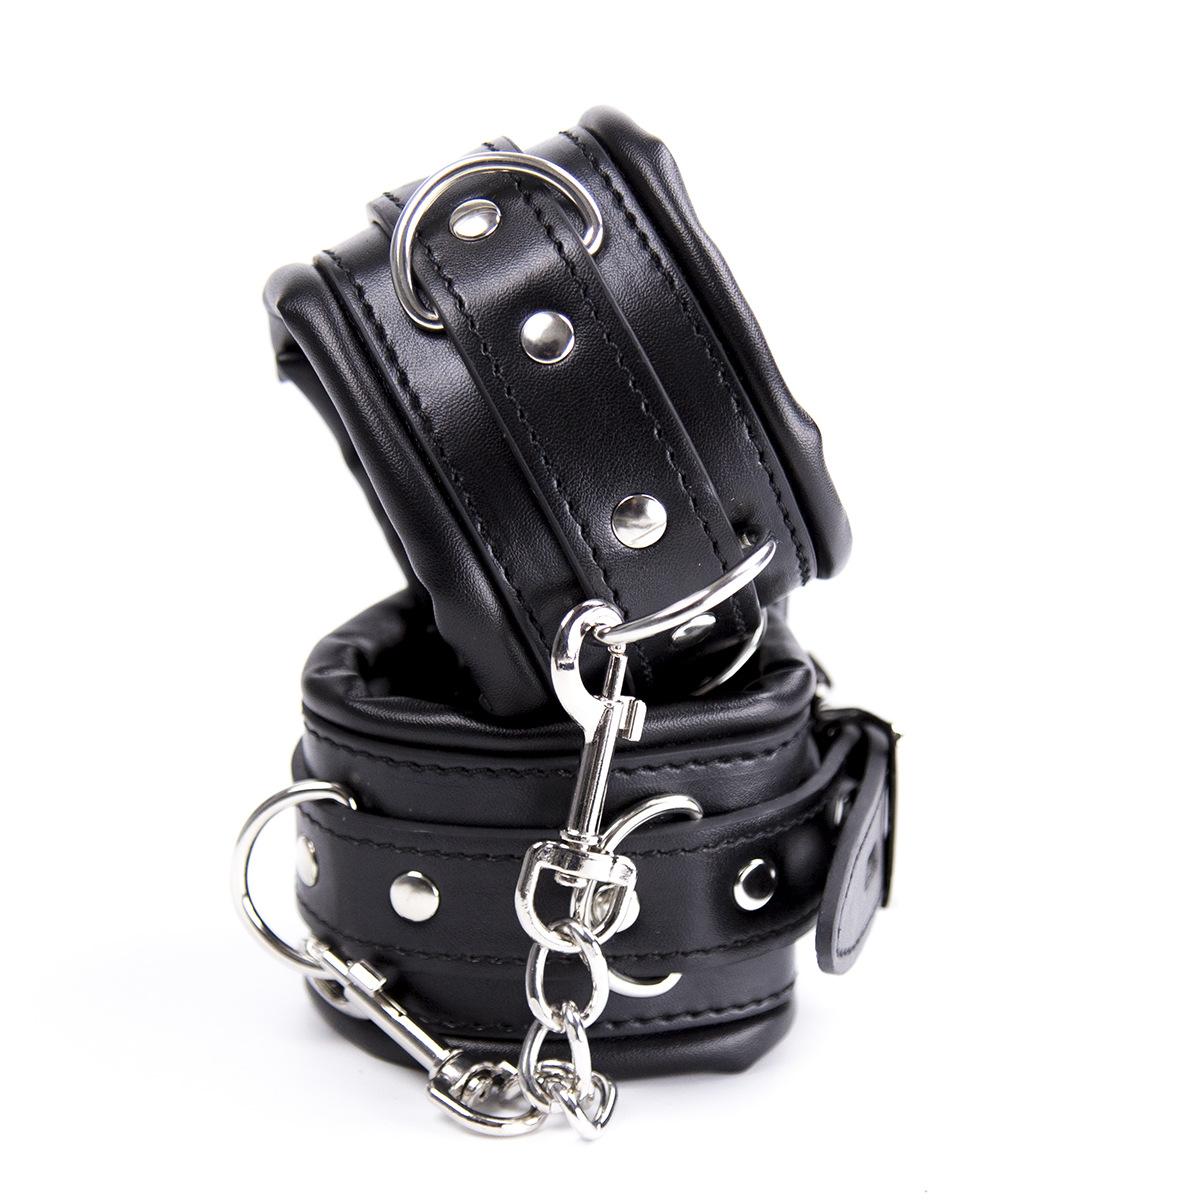 Sexy Adjustable Leather Handcuffs Slave Fetish Roleplay Bdsm Bondage Sex Toys Handcuffs For Couples